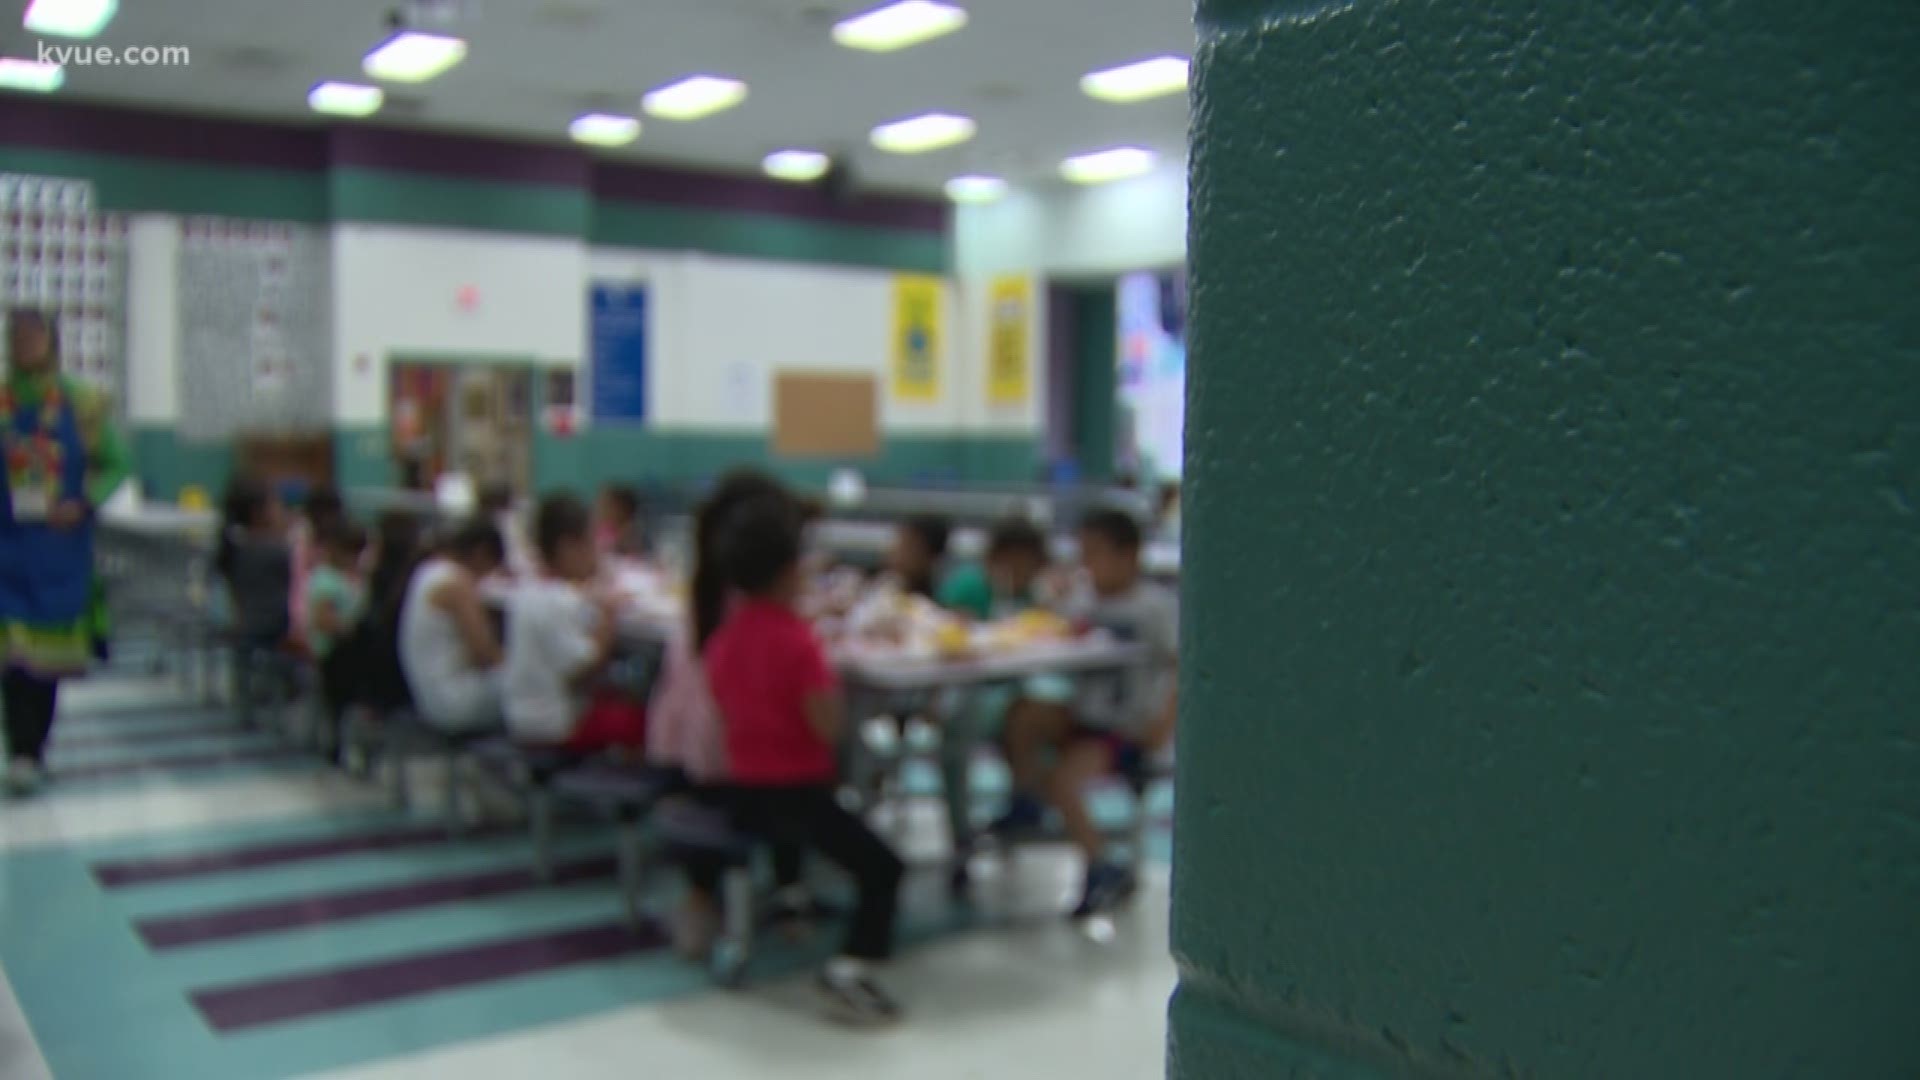 As schools release students for the summer, Austin ISD announced it would offer free breakfast and lunch for anyone under 18 years old.